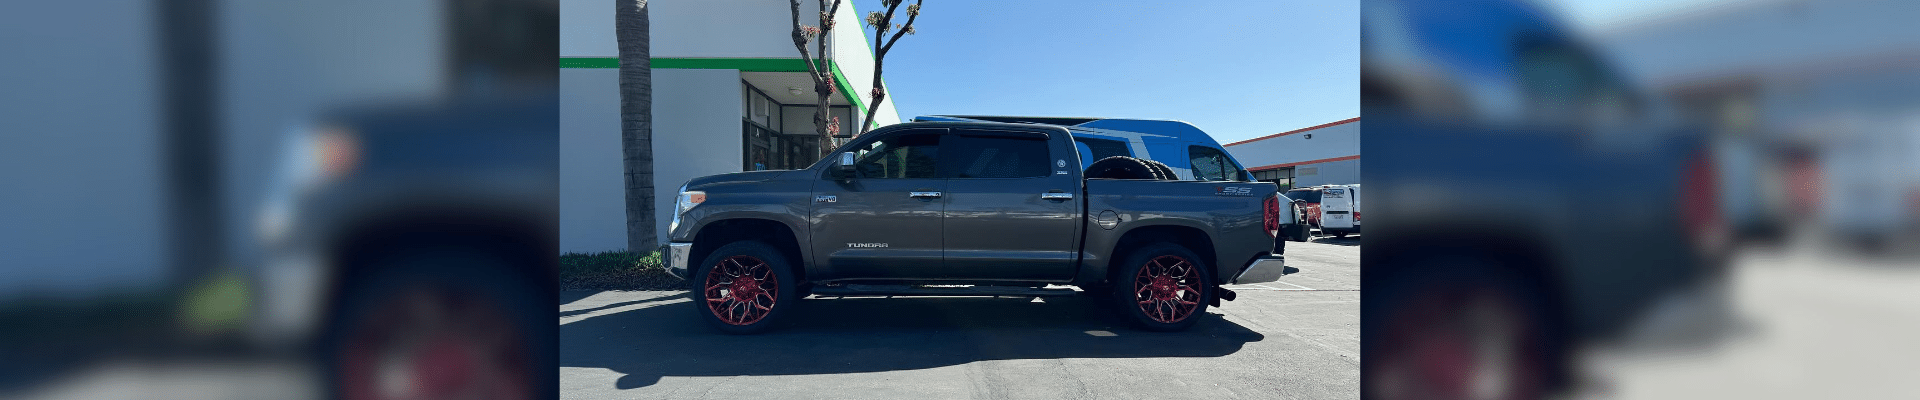 toyota-Tundra-Gallery1.png